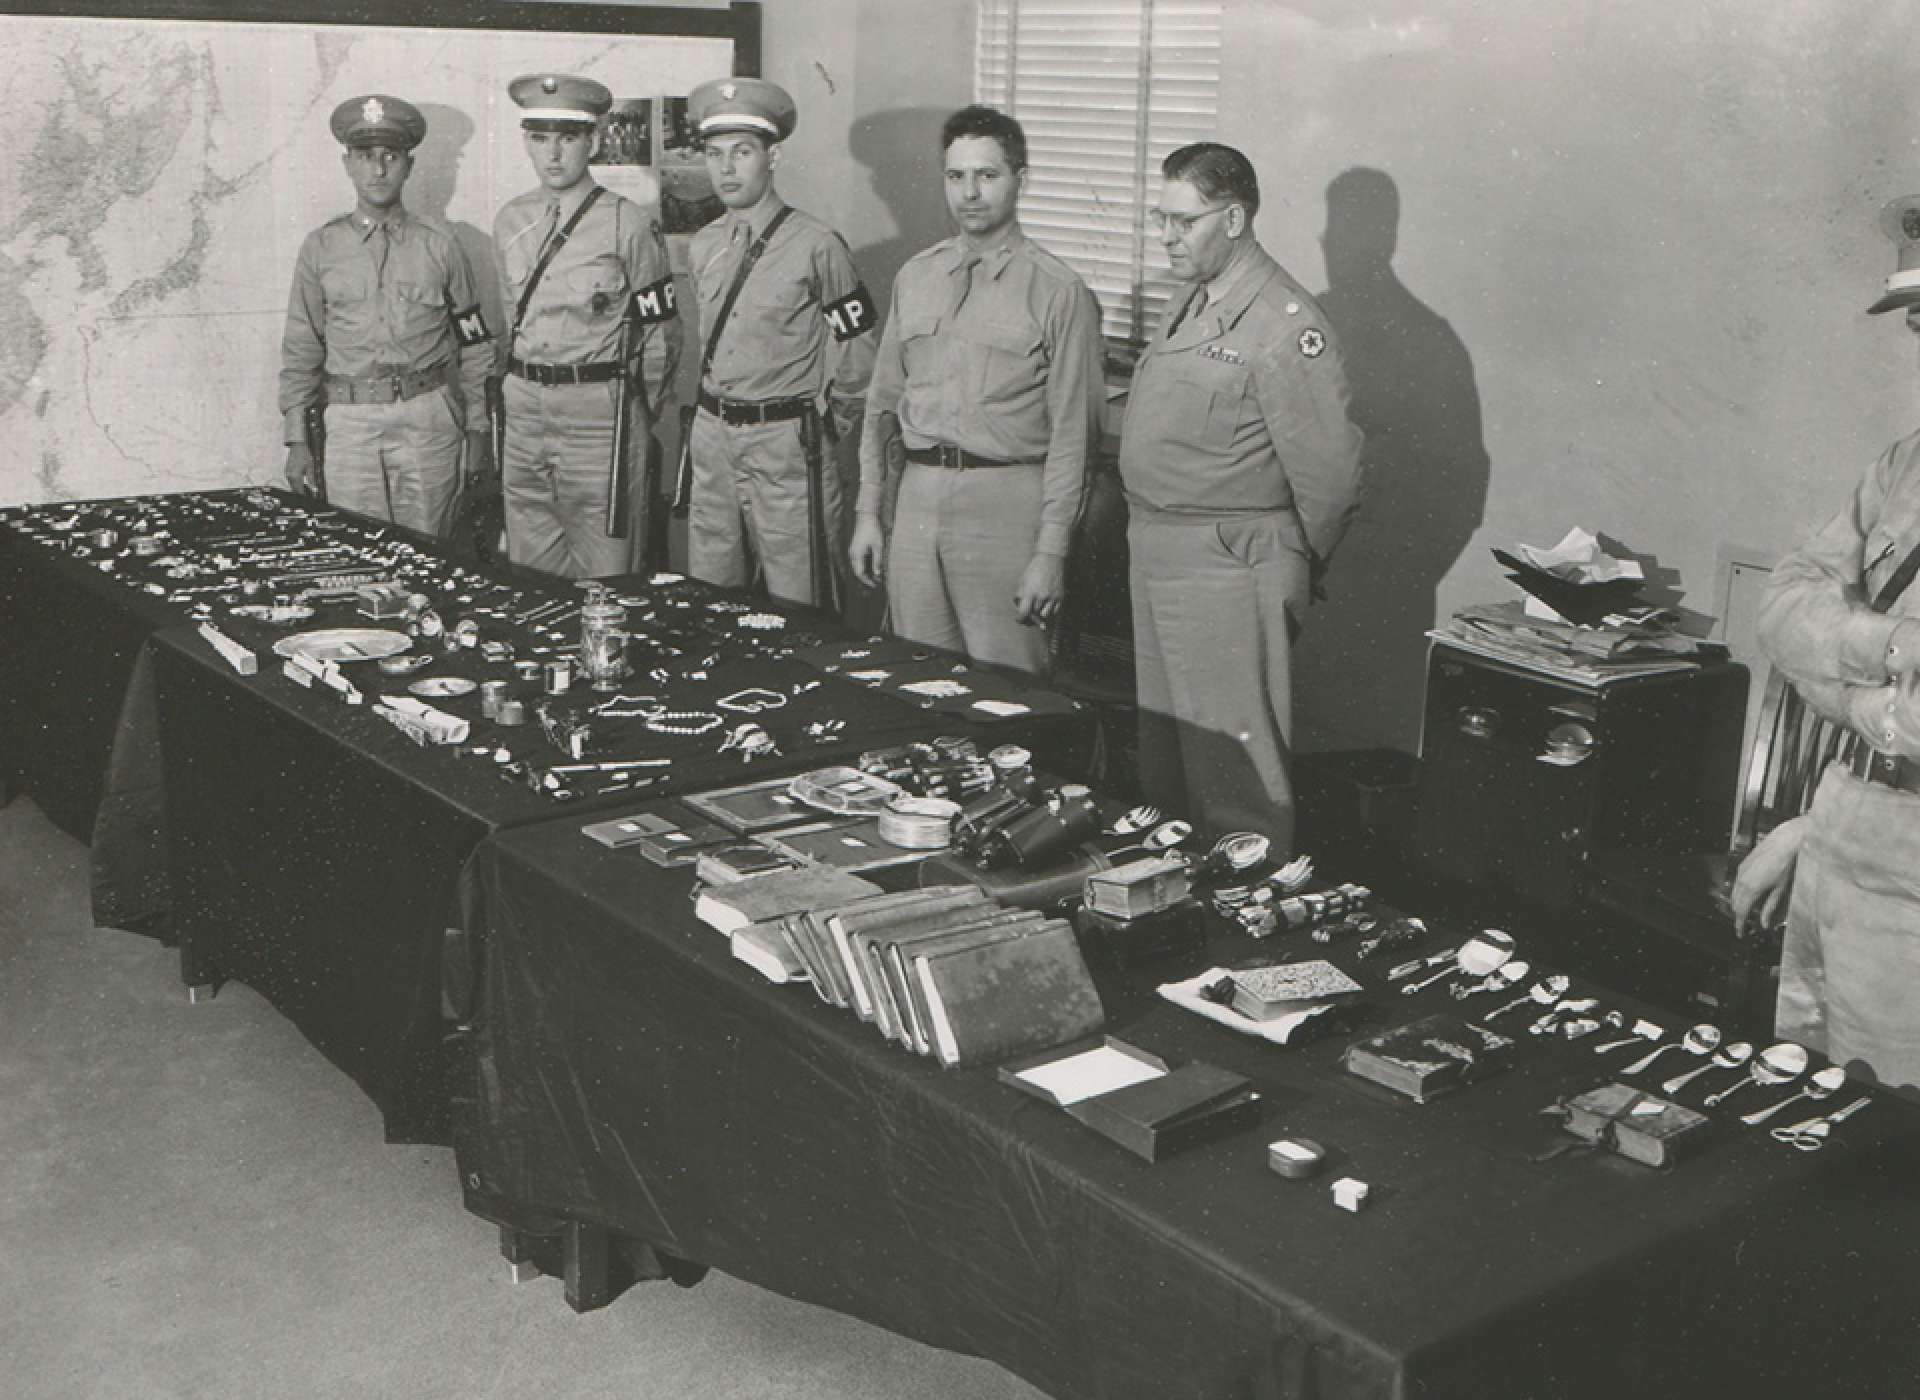 Recovered jewels and other items on display at the Pentagon in Washington, DC